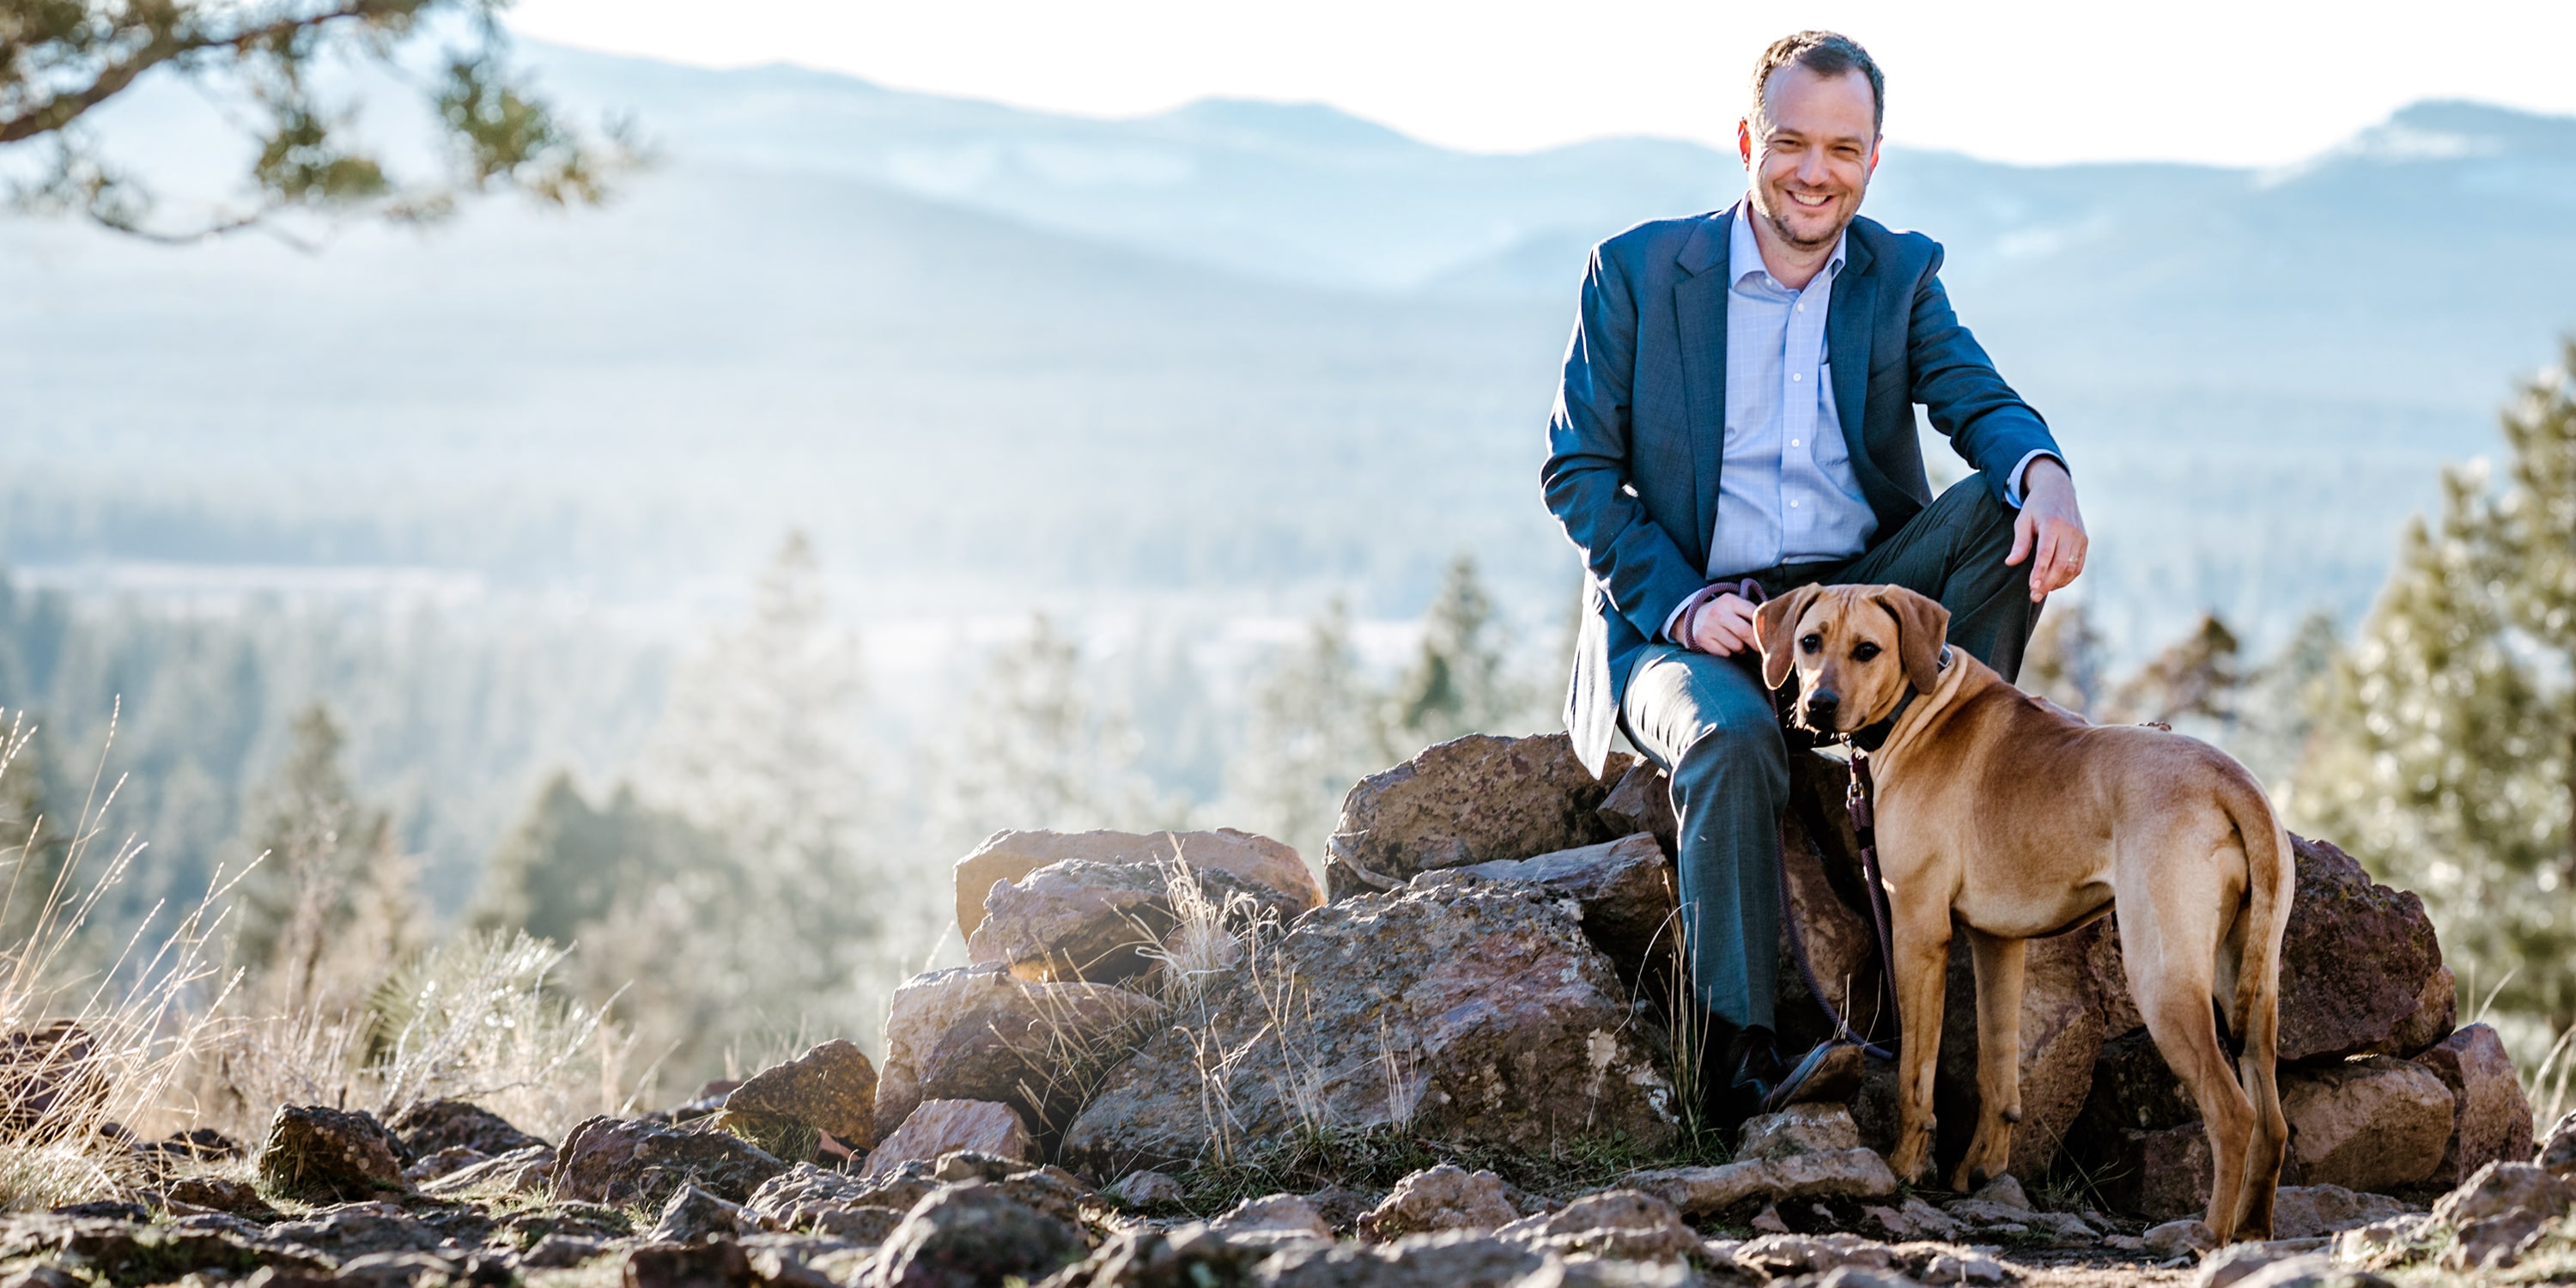 fp main image of cobin soelberg founder of greeley wealth management sitting with his dog